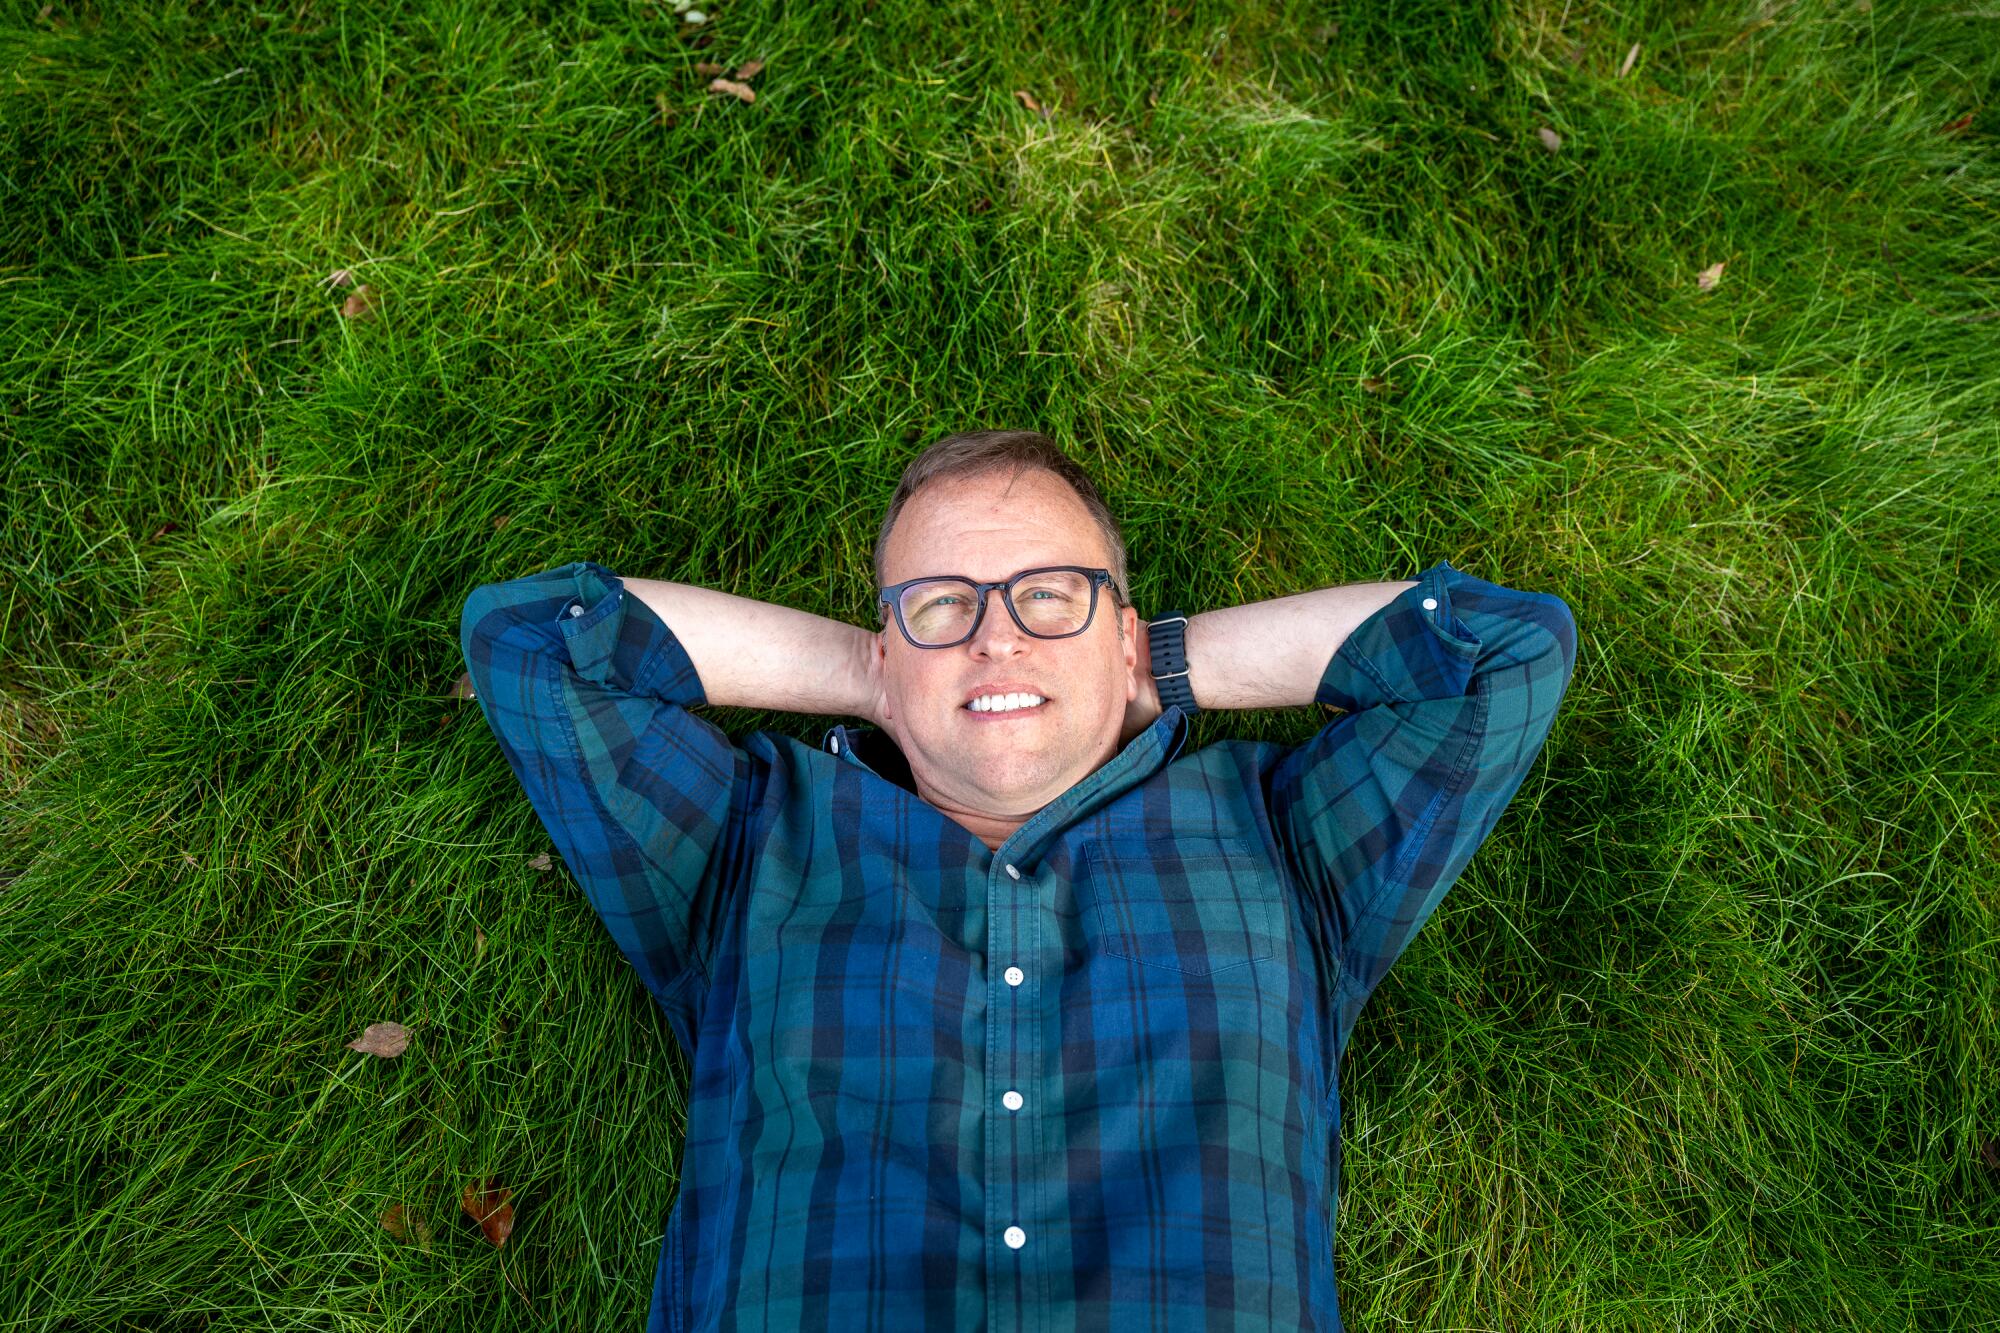 A top-down photo of a man lying with his hands behind his head atop a grassy lawn.